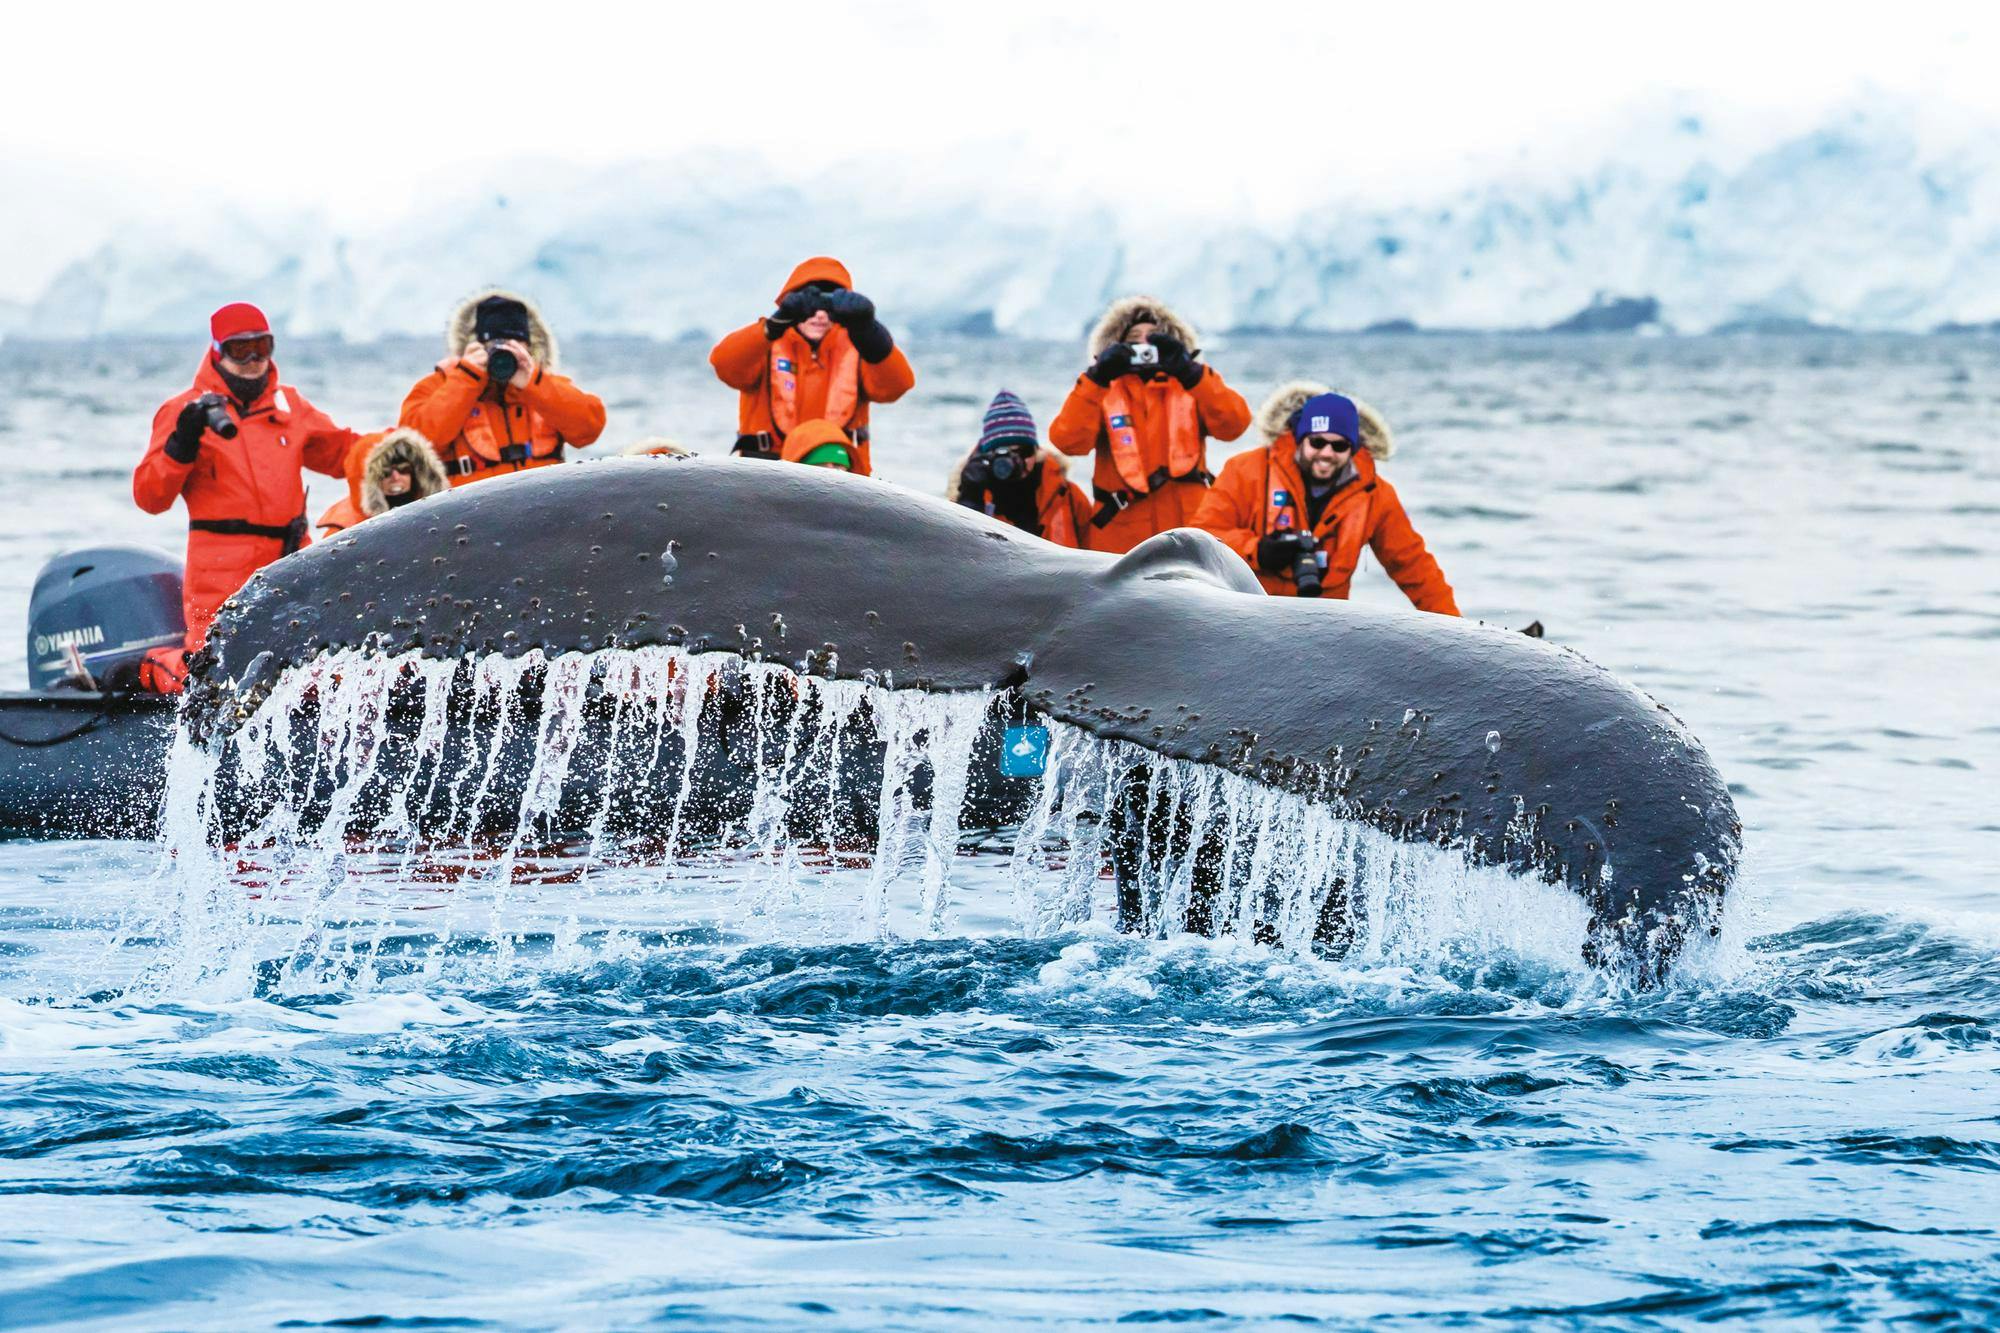 Guests exploring by zodiac have a thrilling encounter as a Humpback Whale dives and shows off his fluke at Paradise Harbor, Antarctic Peninsula, Southern Ocean, Antarctica.